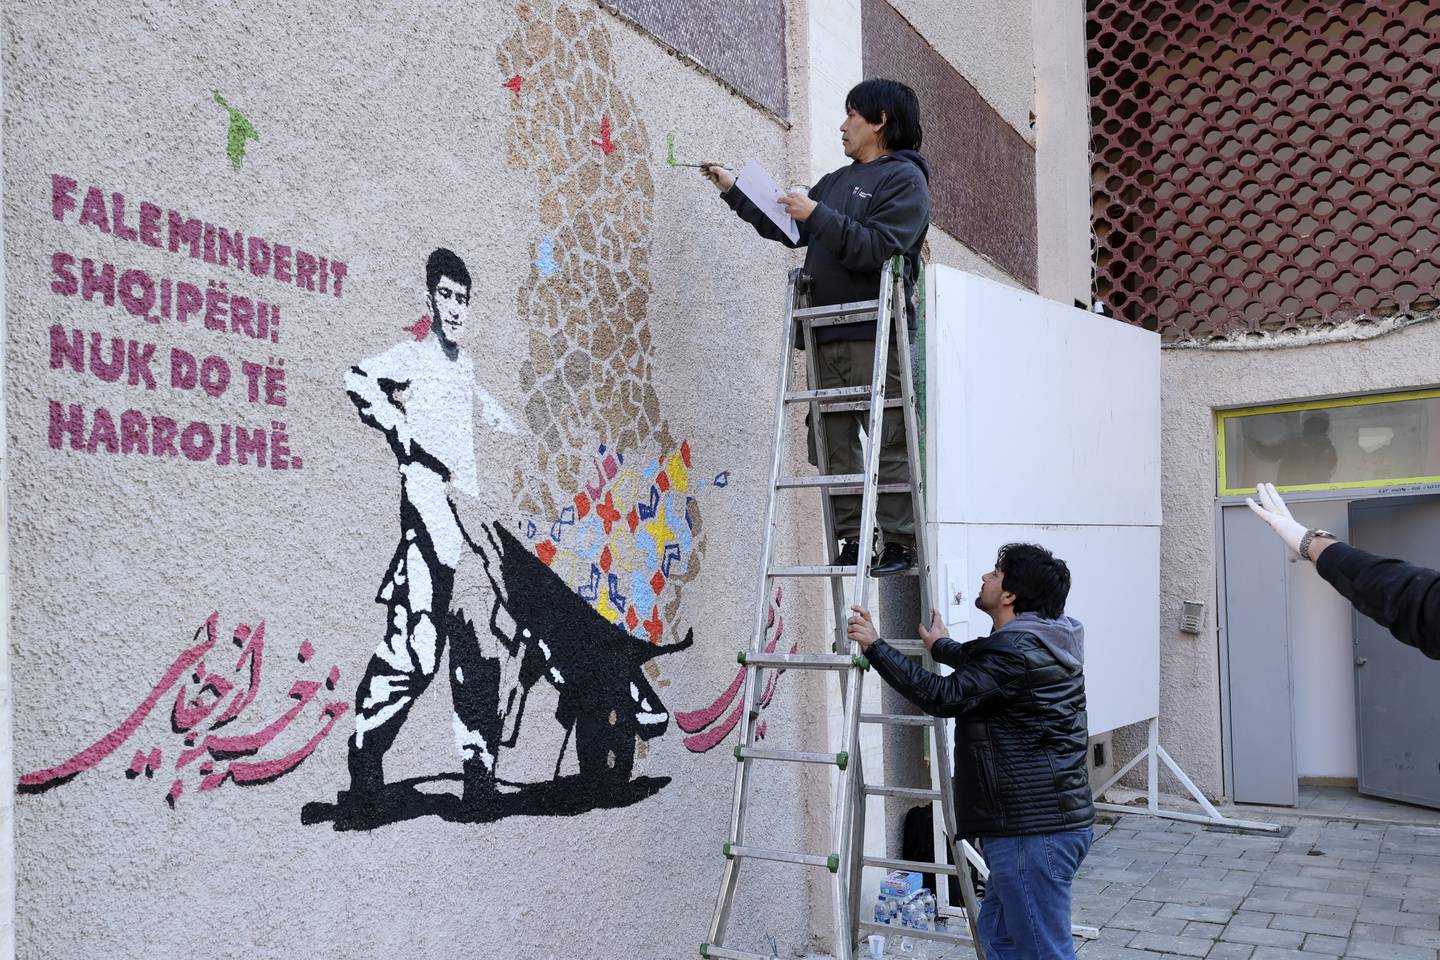 The mural calls on Afghans not to forget their brethren. Photo: AP